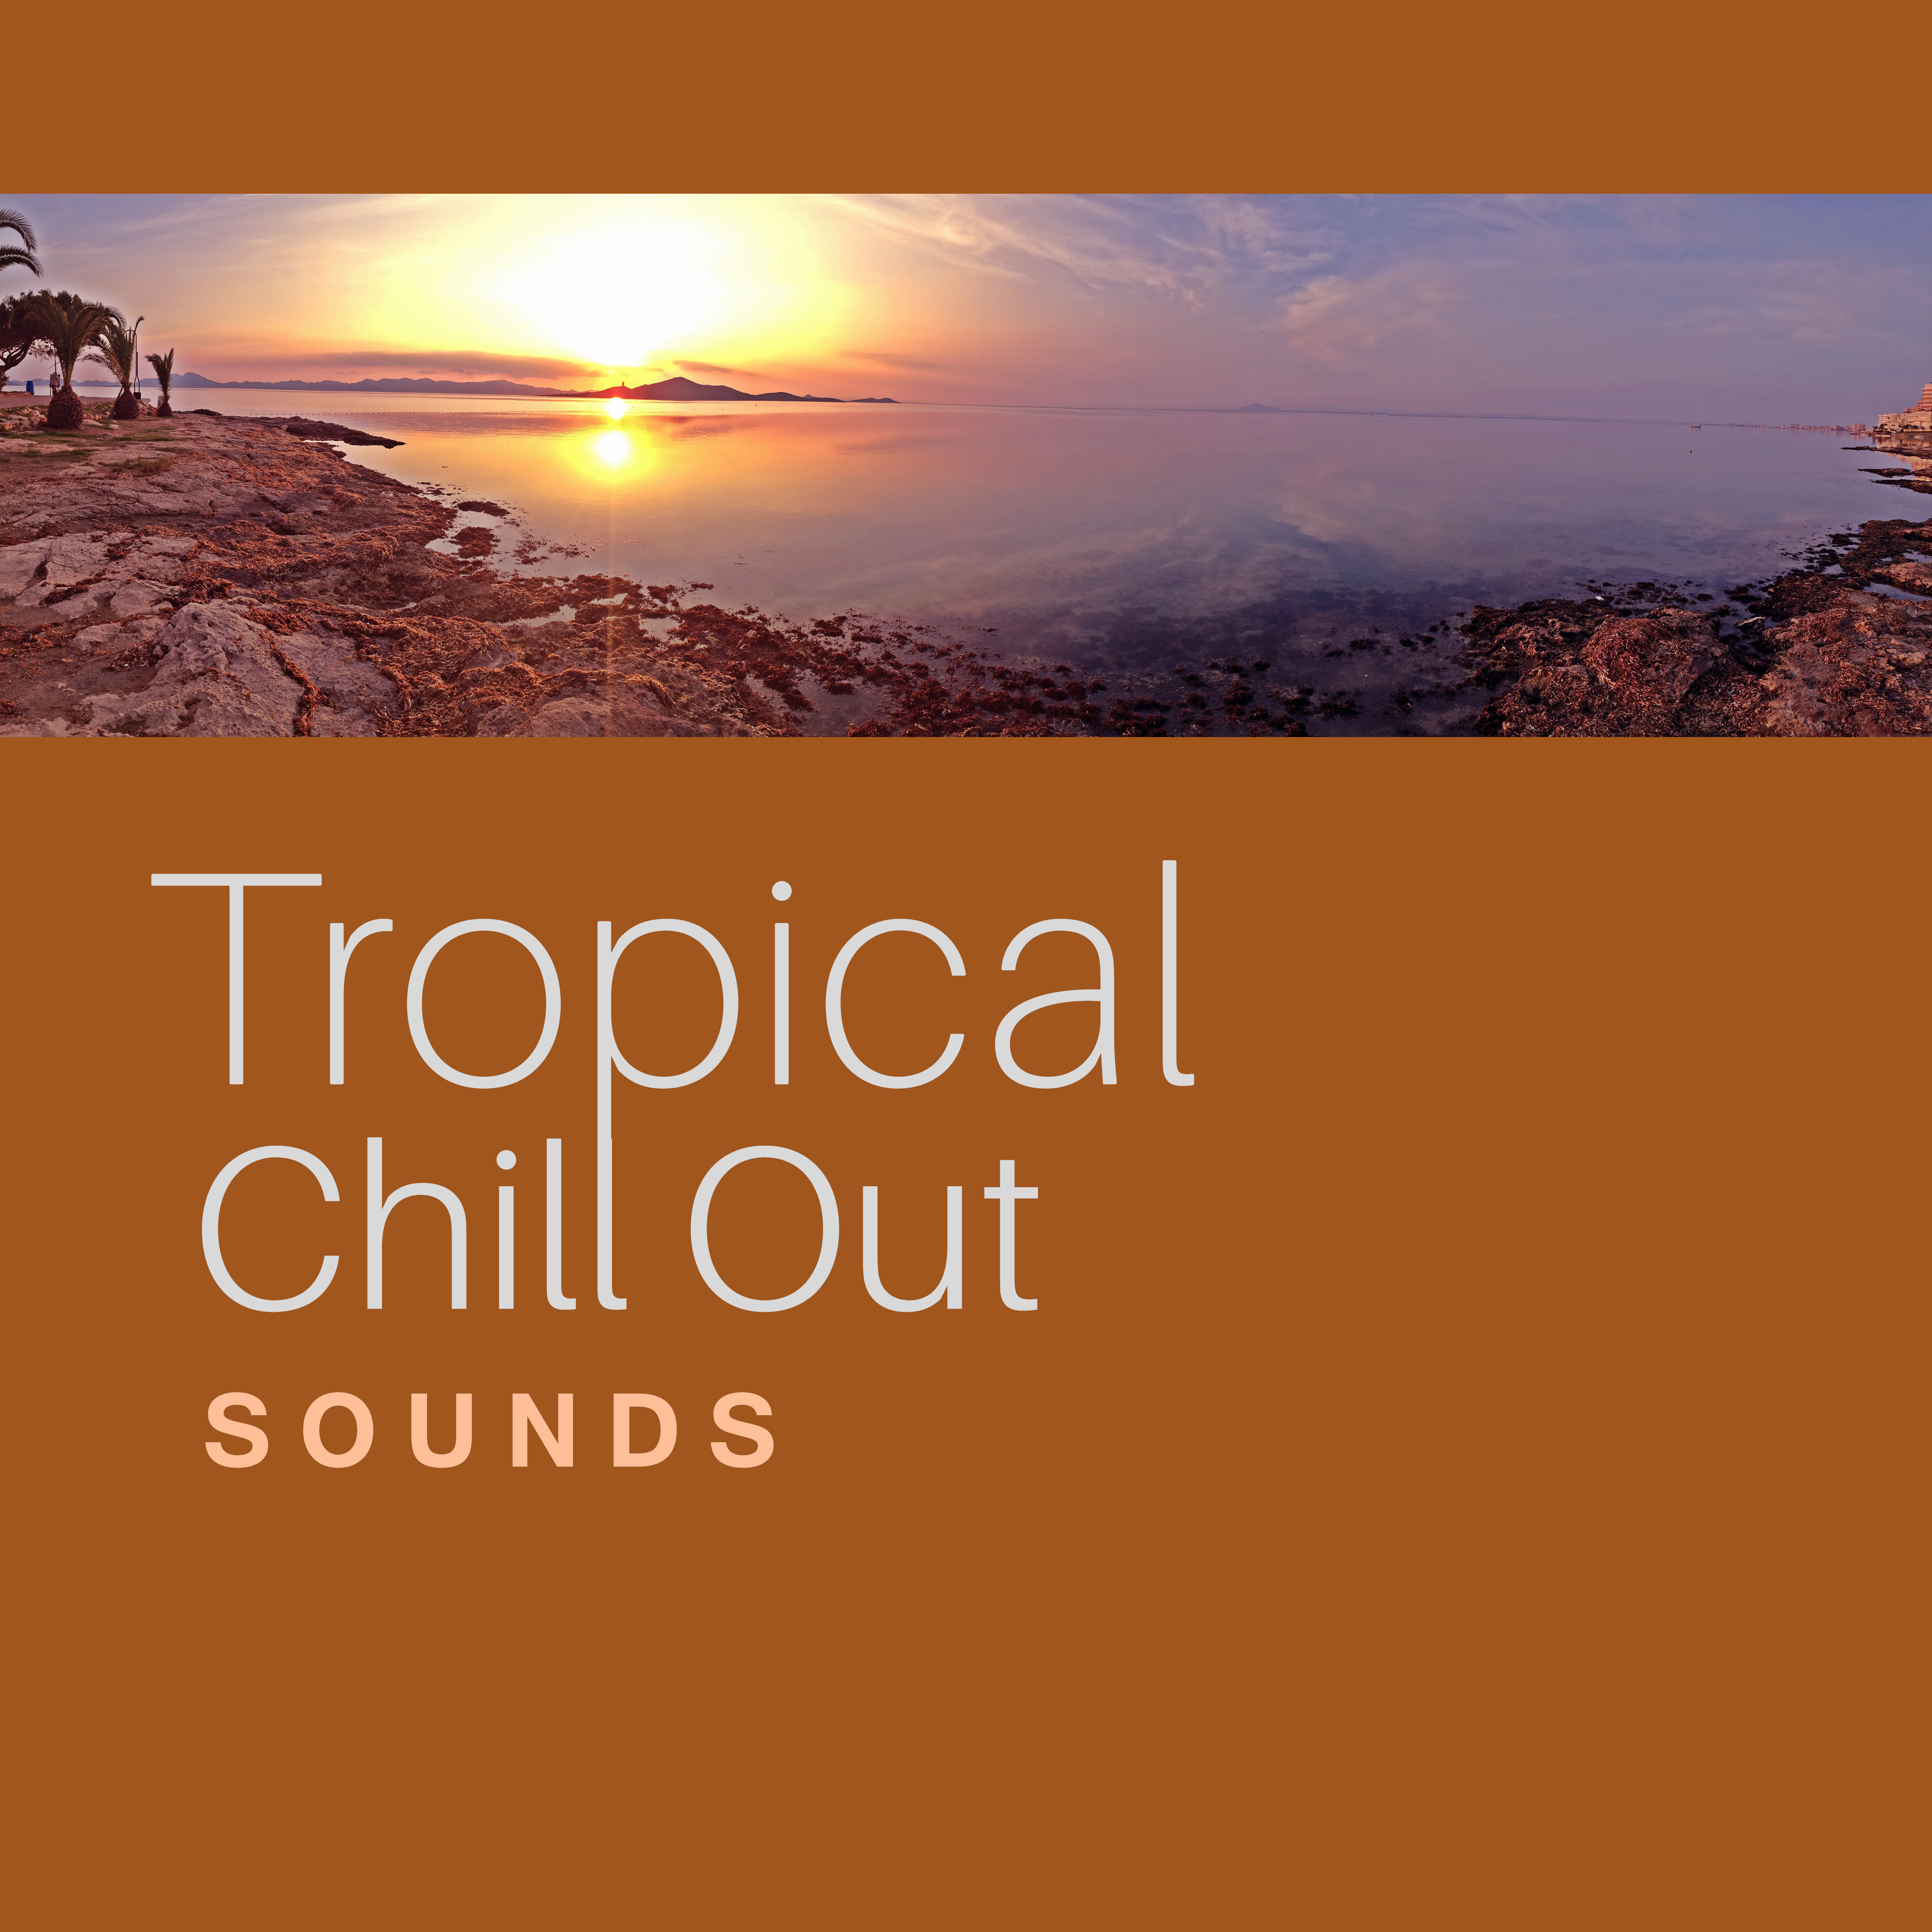 Tropical Chill Out Sounds  Summer Vibes, Holiday Music, Chill Out 2017, Peaceful Waves